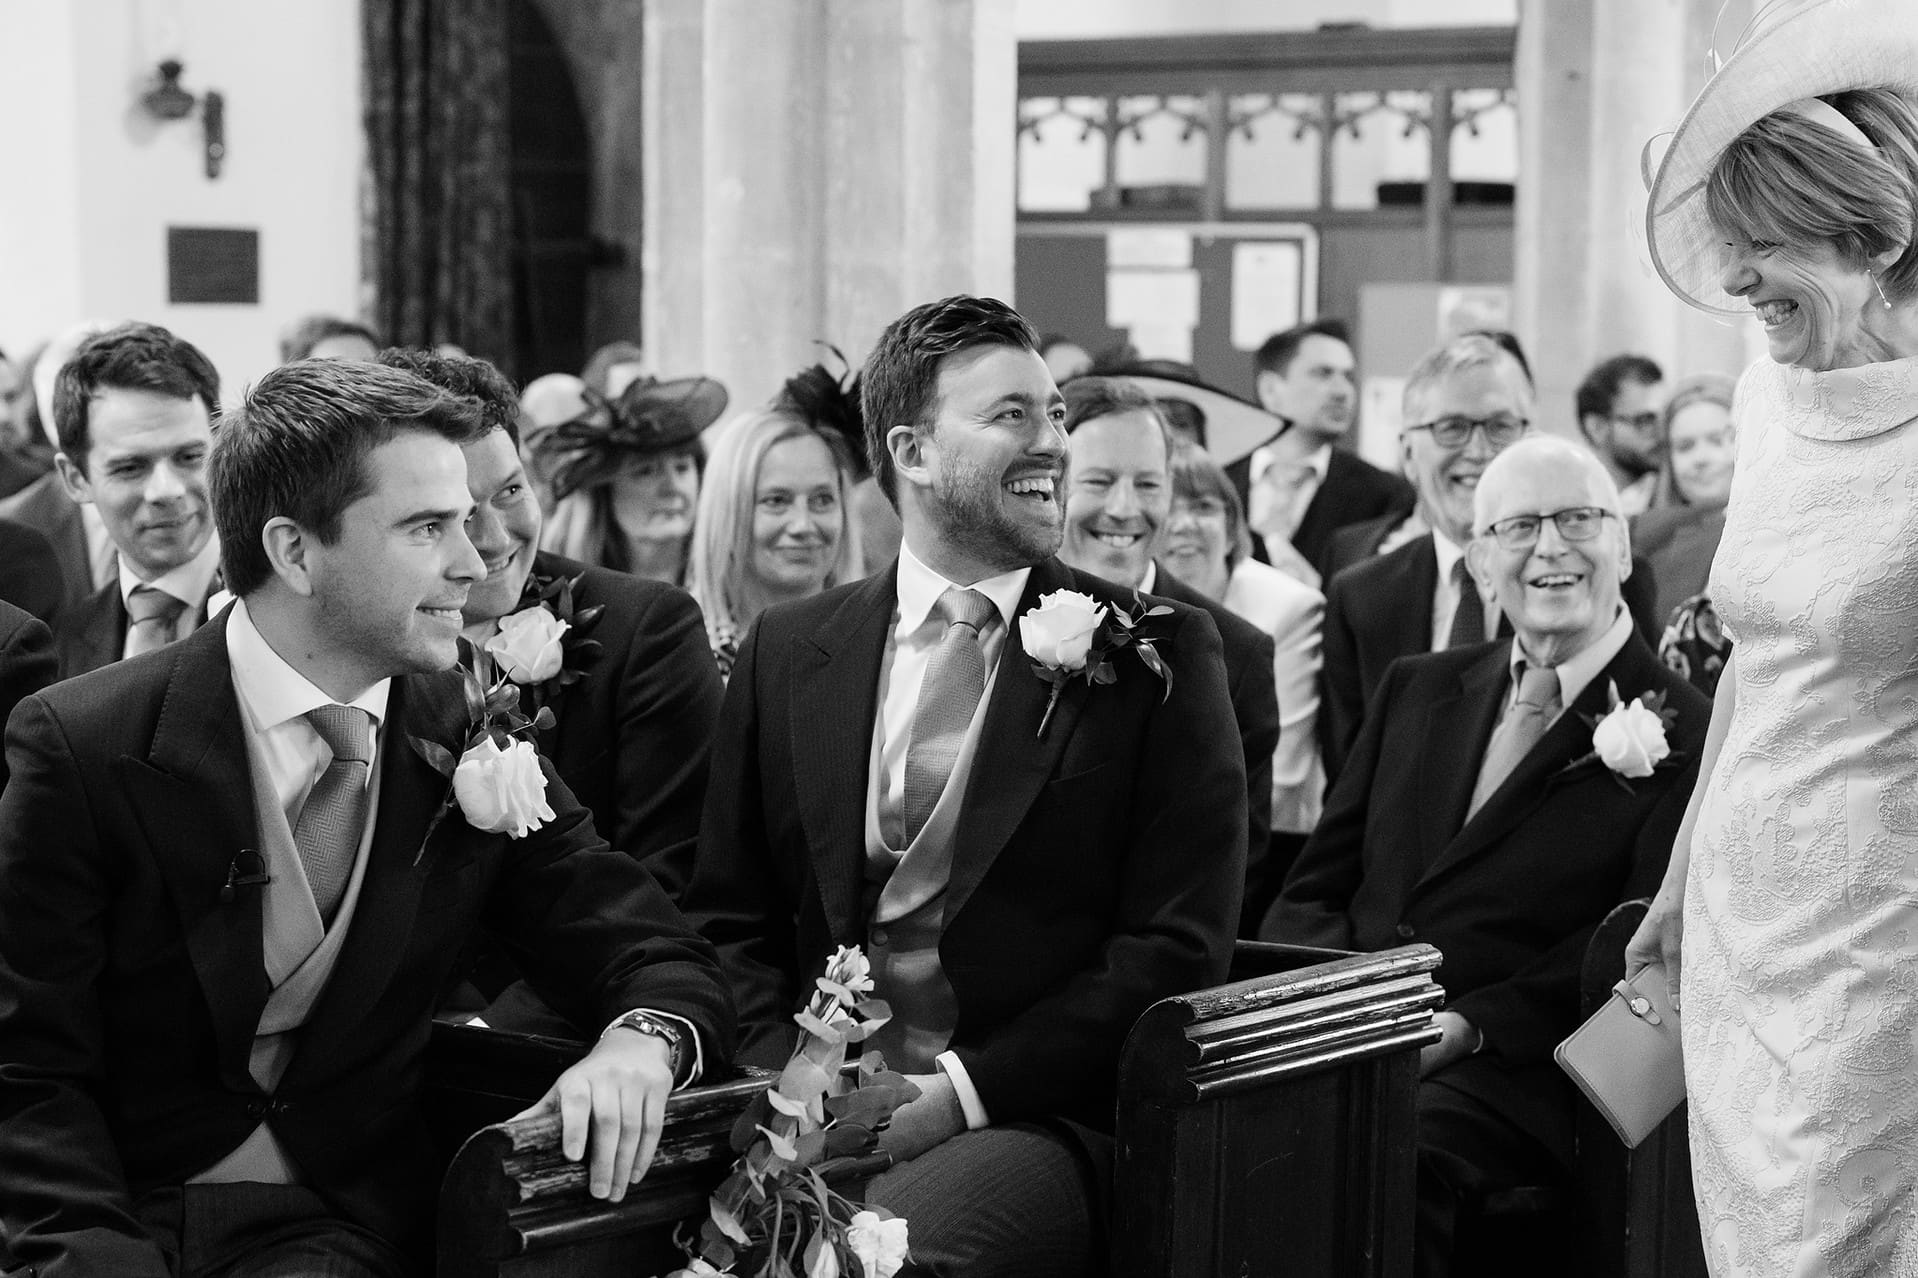 The groom and best man reacting to the bride's mum walking down the aisle